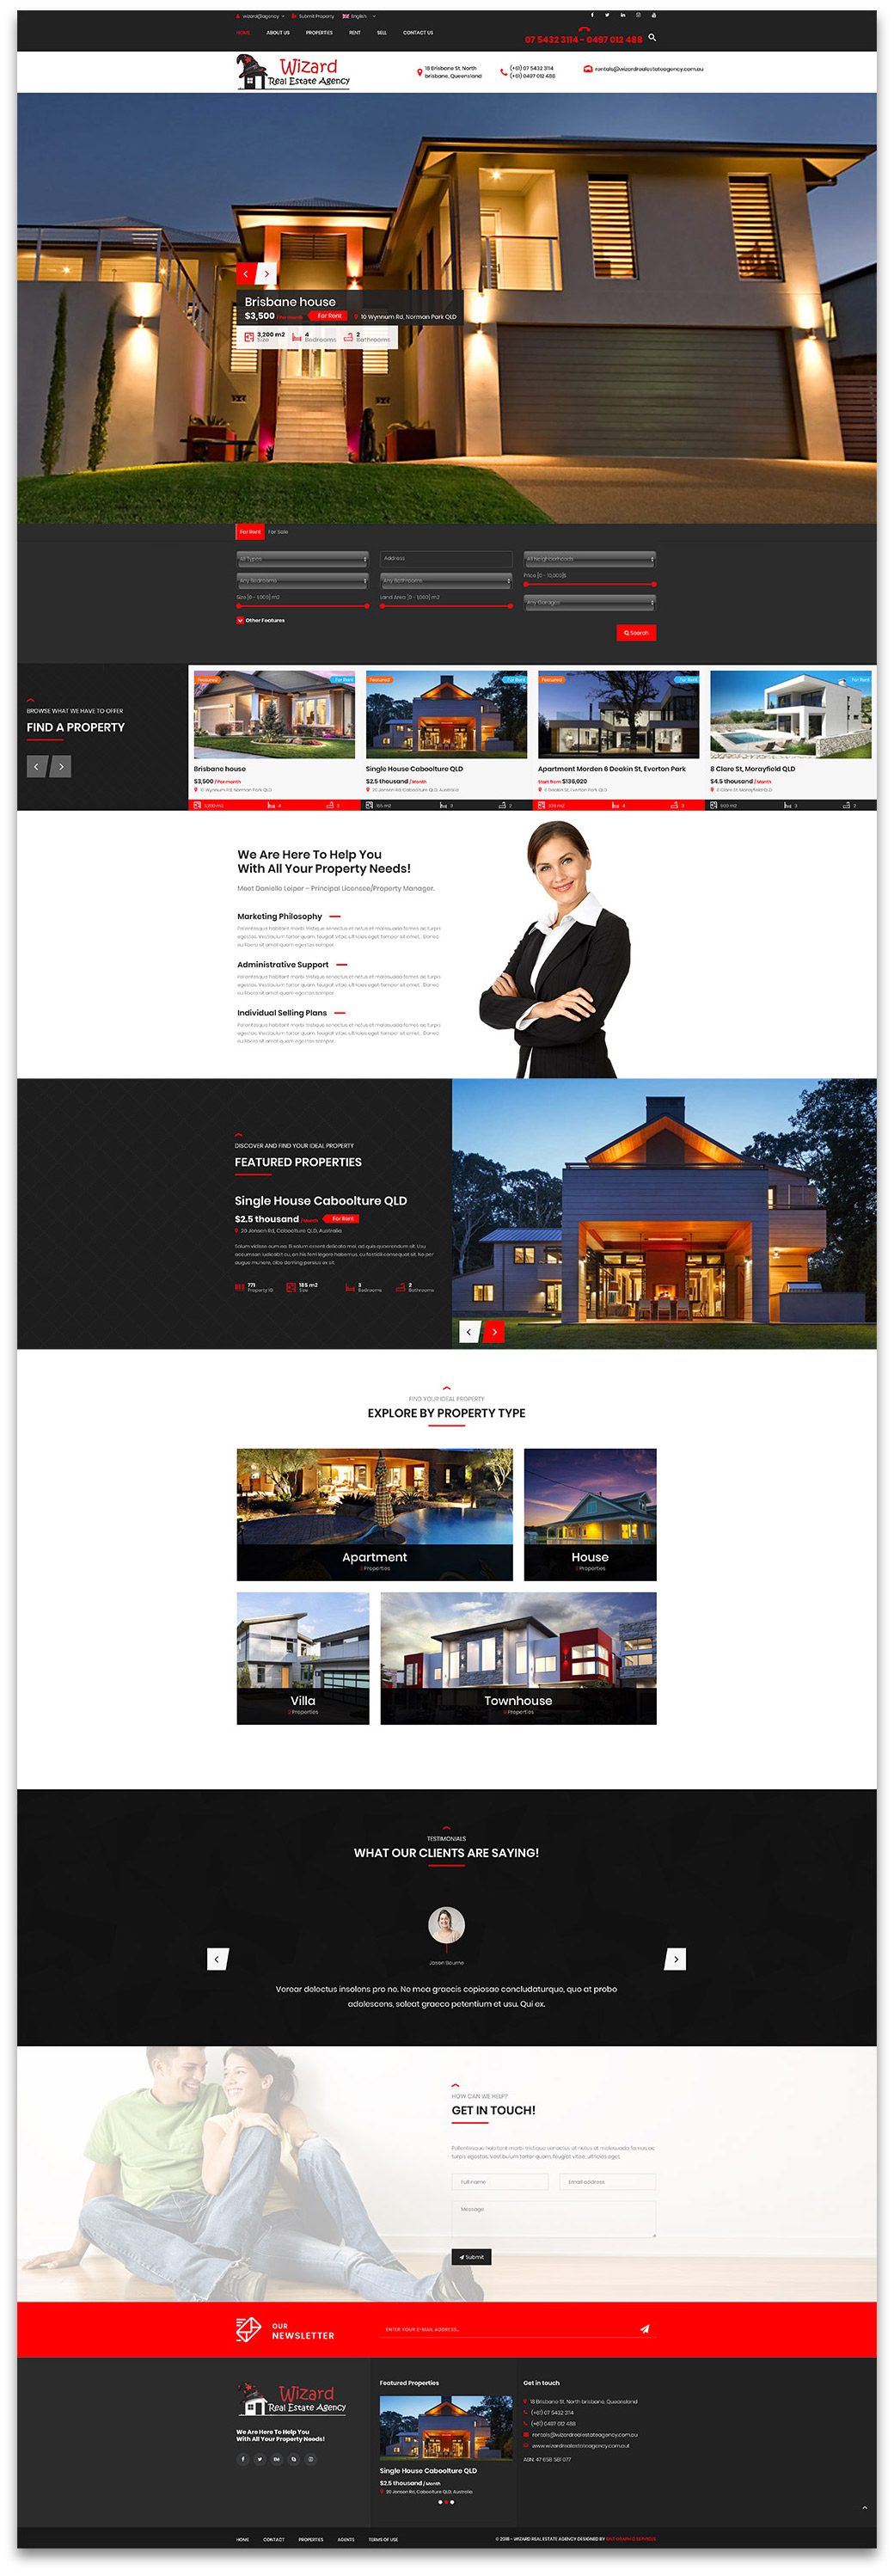 Wizard Real Estate Website deigned & built by GNT Graphic Services